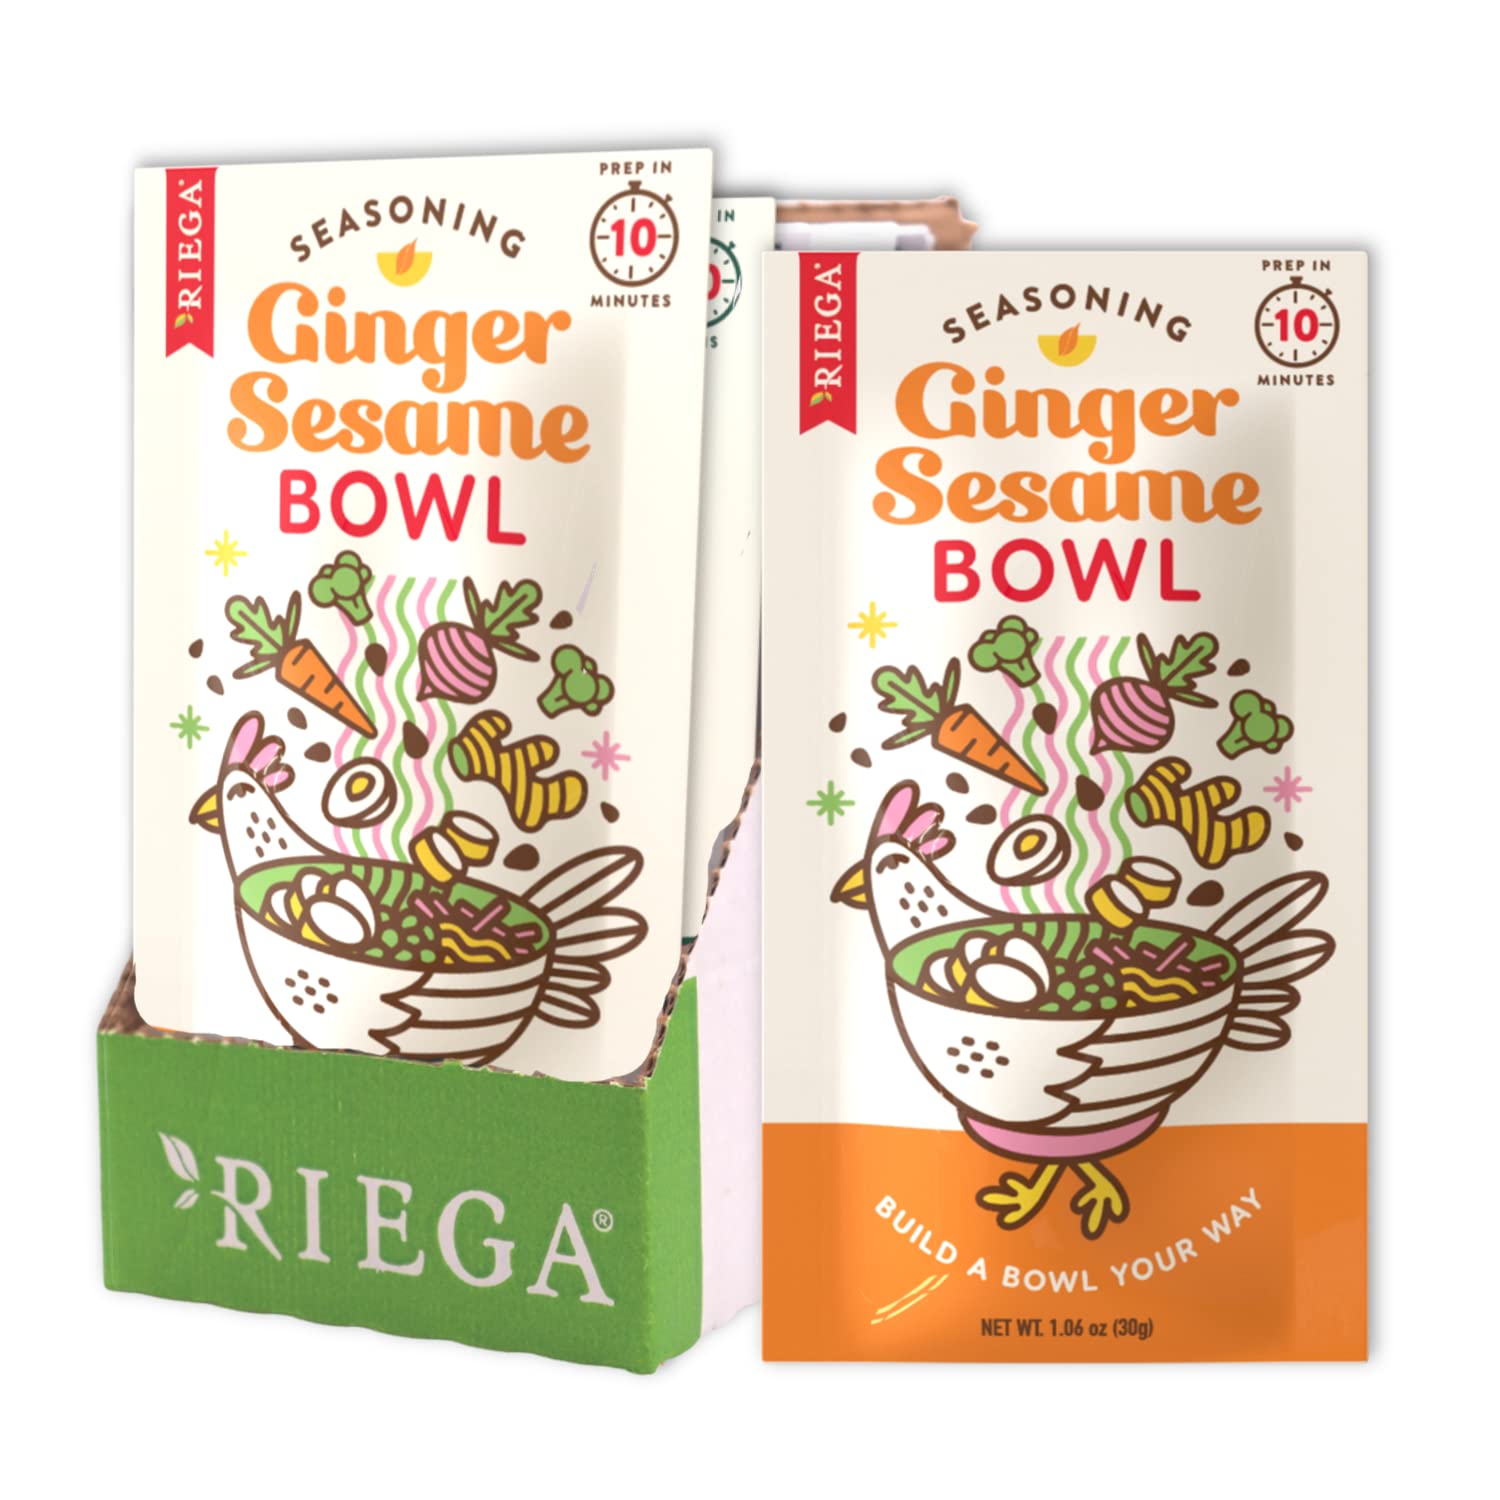 Riega Ginger Sesame Bowl Seasoning, Perfect Asian Seasonings Spice Mix for Sesame Ginger Rice or Salad Bowls, 1.06 Ounce (Pack of 8)